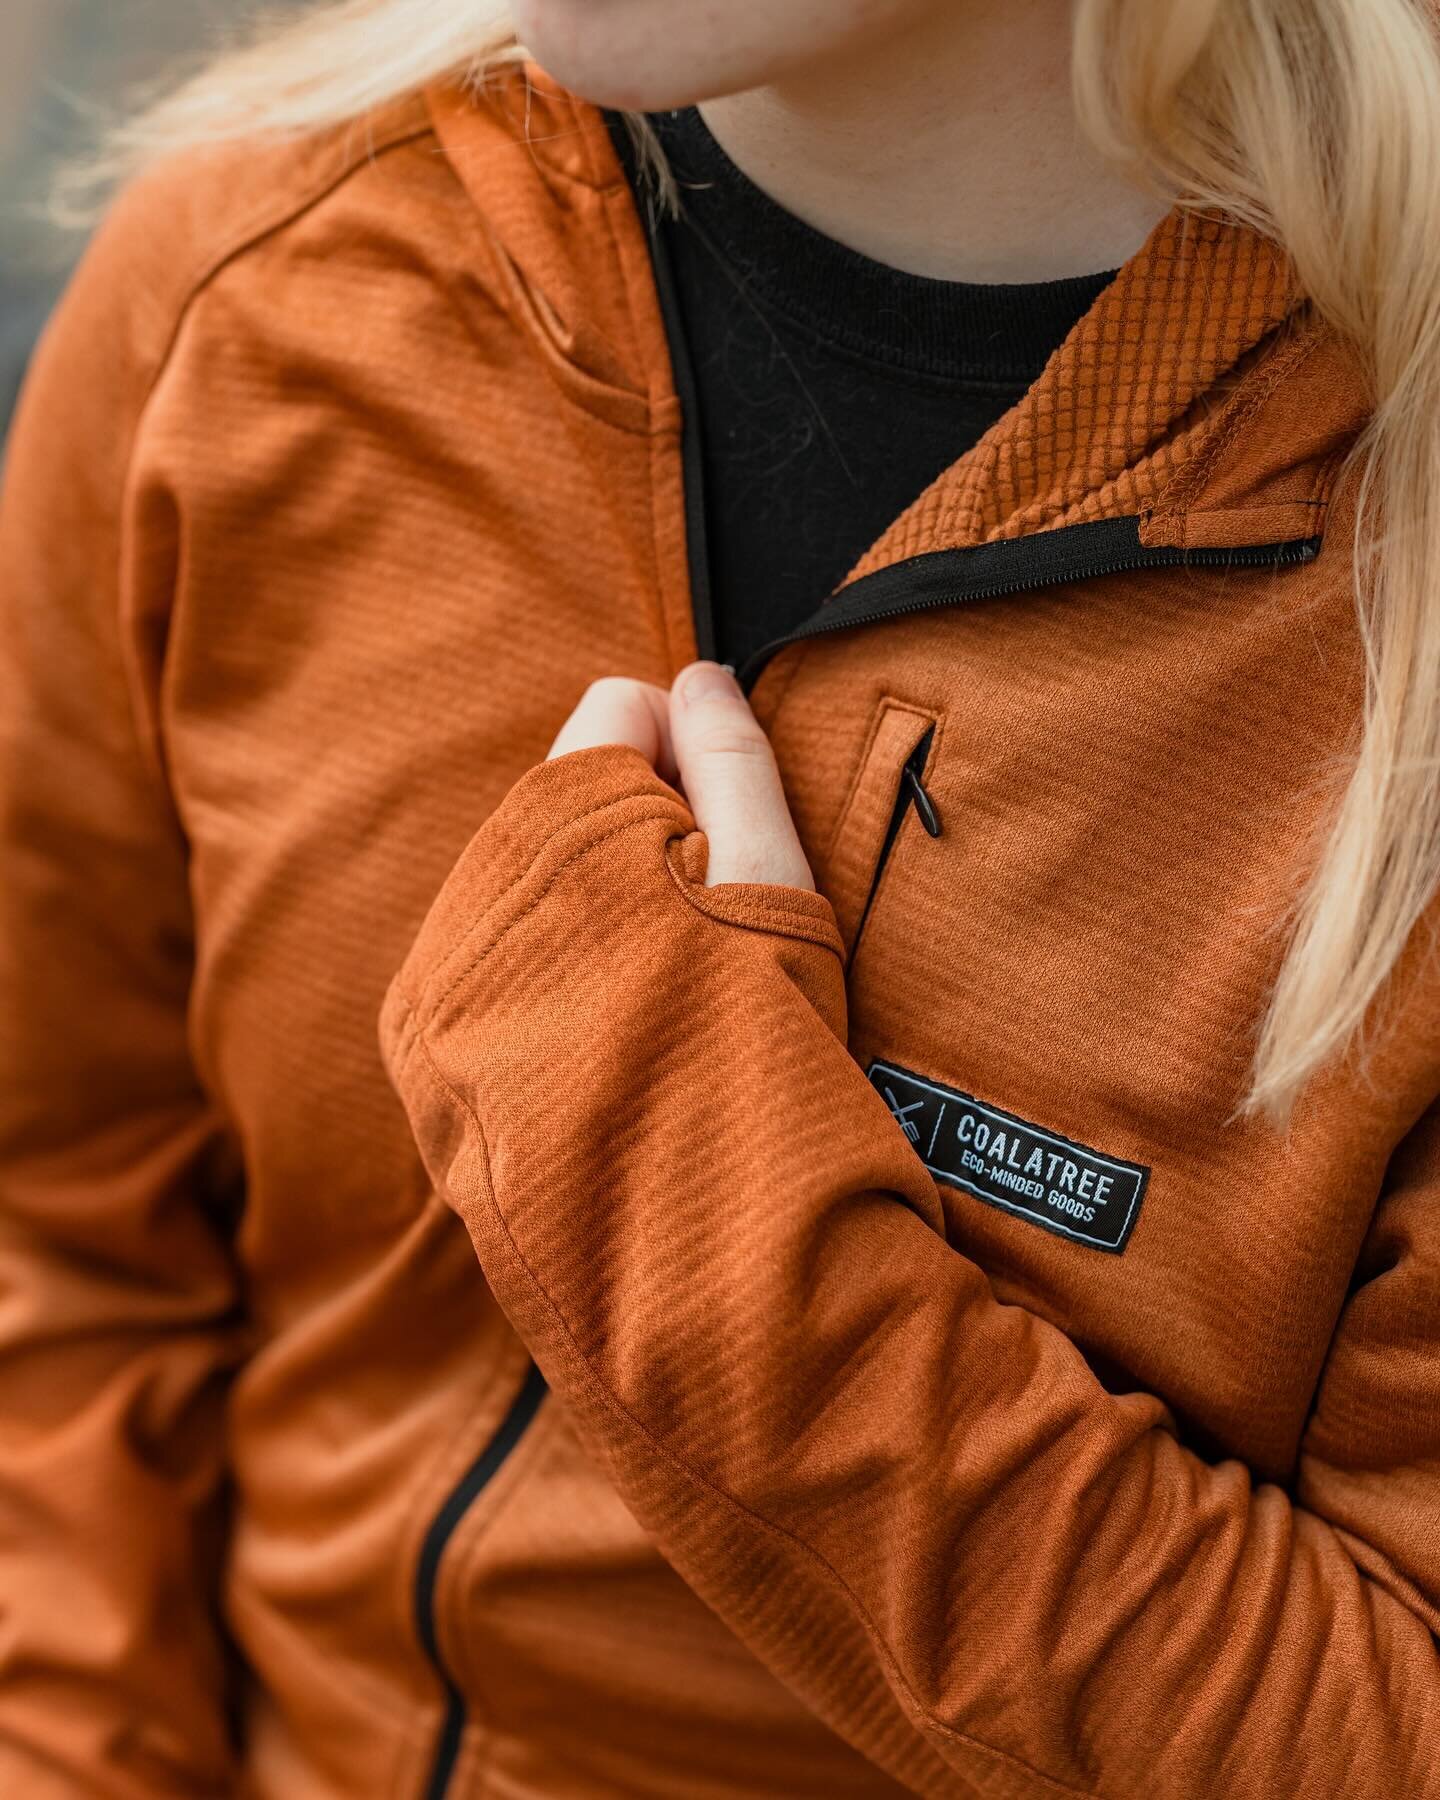 One of our favorites from our friends at @coalatree; the Baseline Mid-layer not only is equipped to keep you warm, but also features a durable honeycomb fabric to maintain shape and softness for years to come. ✨🚩
&bull;
&bull;
&bull;
#FlagshipDuluth